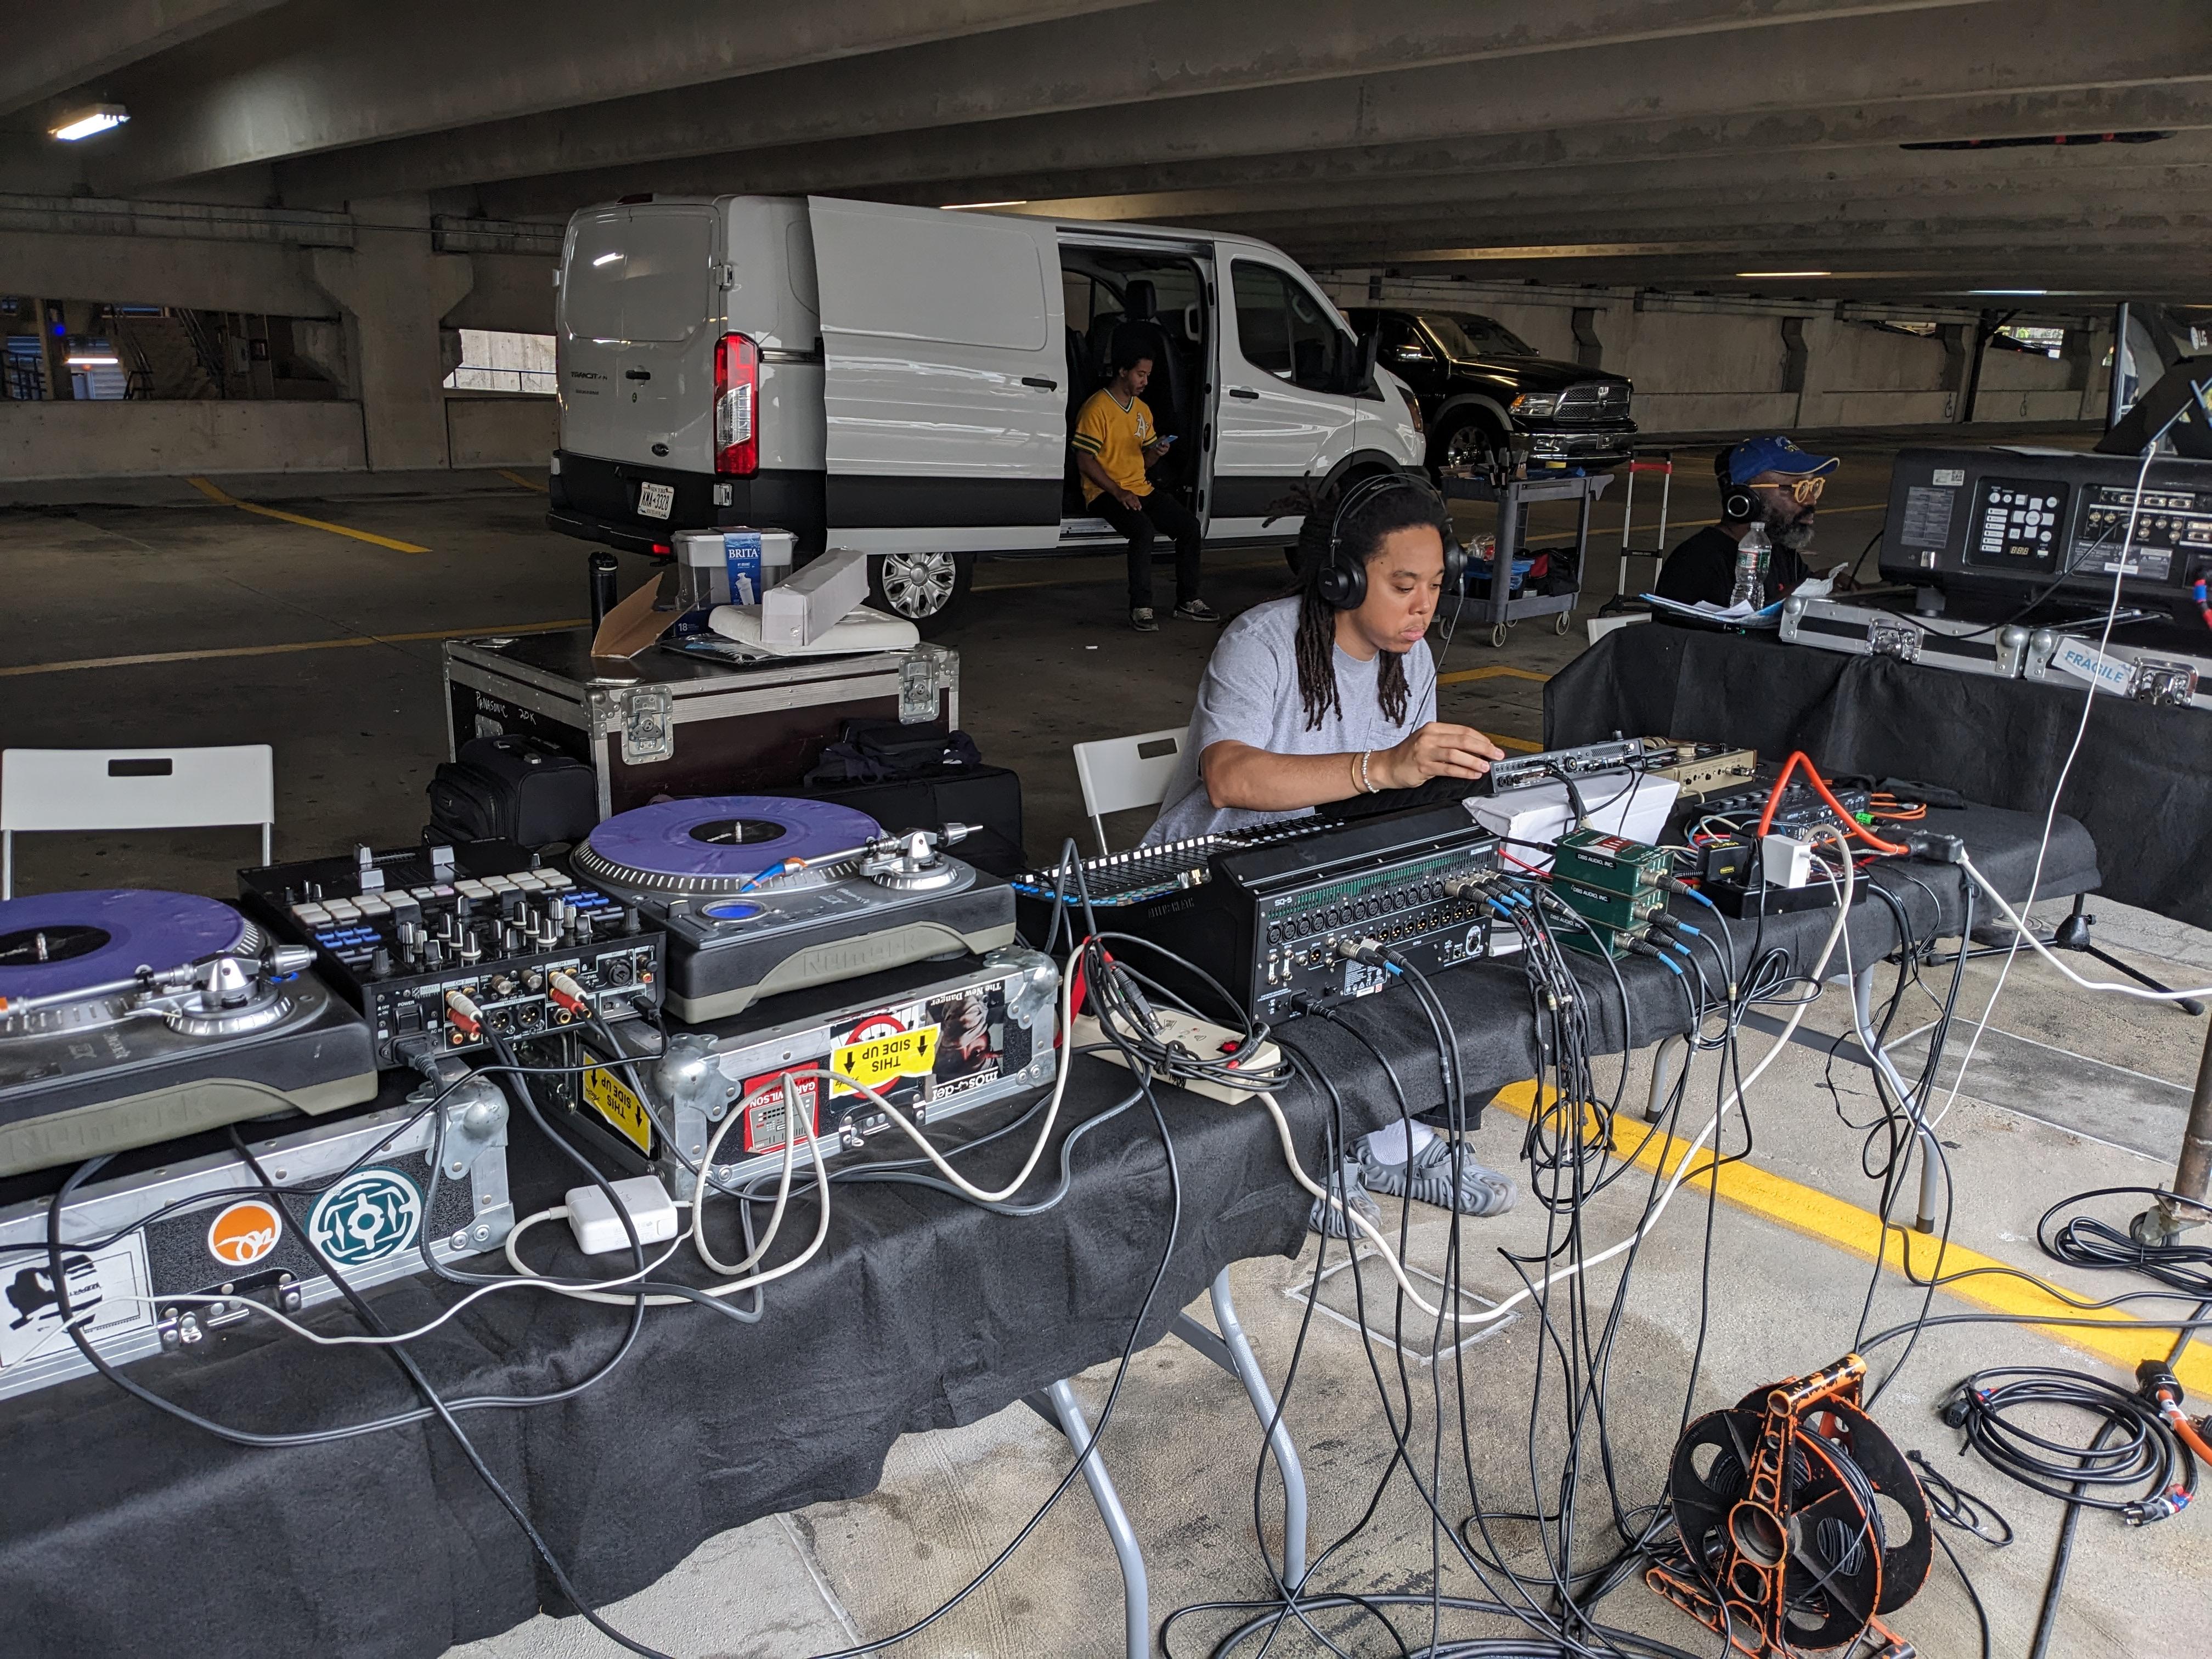 Photo by eo Studios. A person works at a table covered in computers and audio equipment, inside a parking garage.